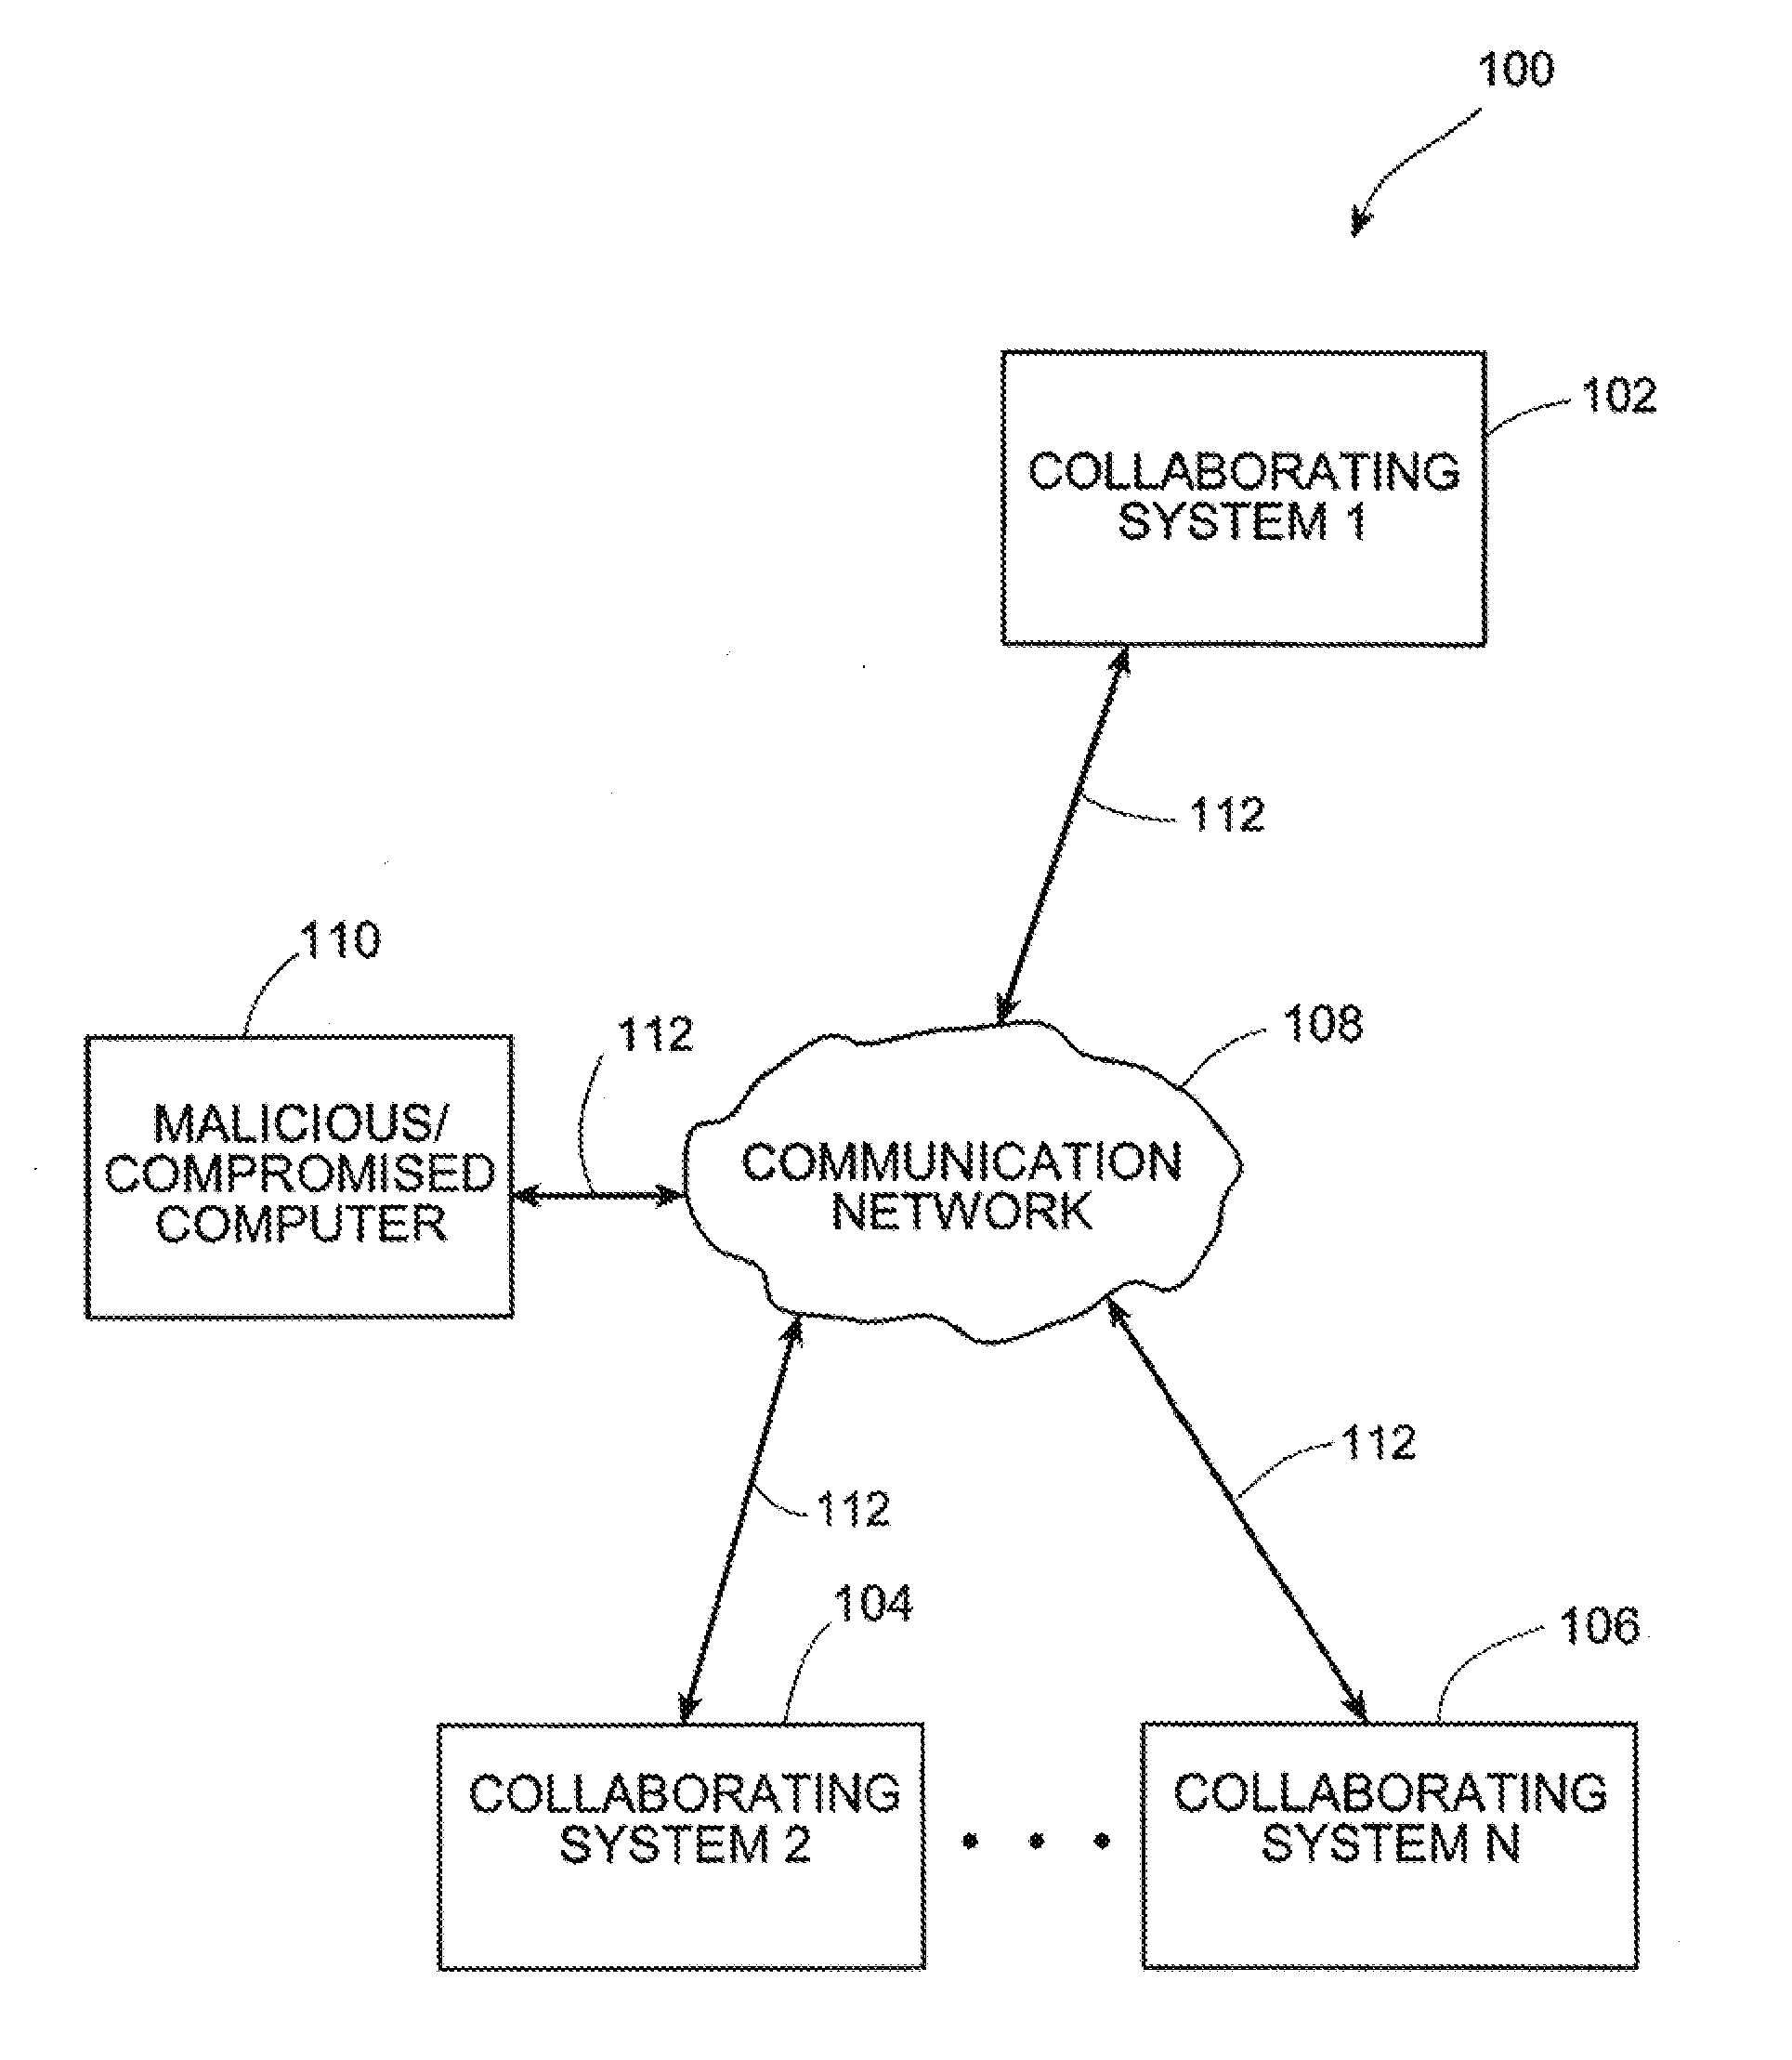 Systems and Methods for Correlating and Distributing Intrusion Alert Information Among Collaborating Computer Systems